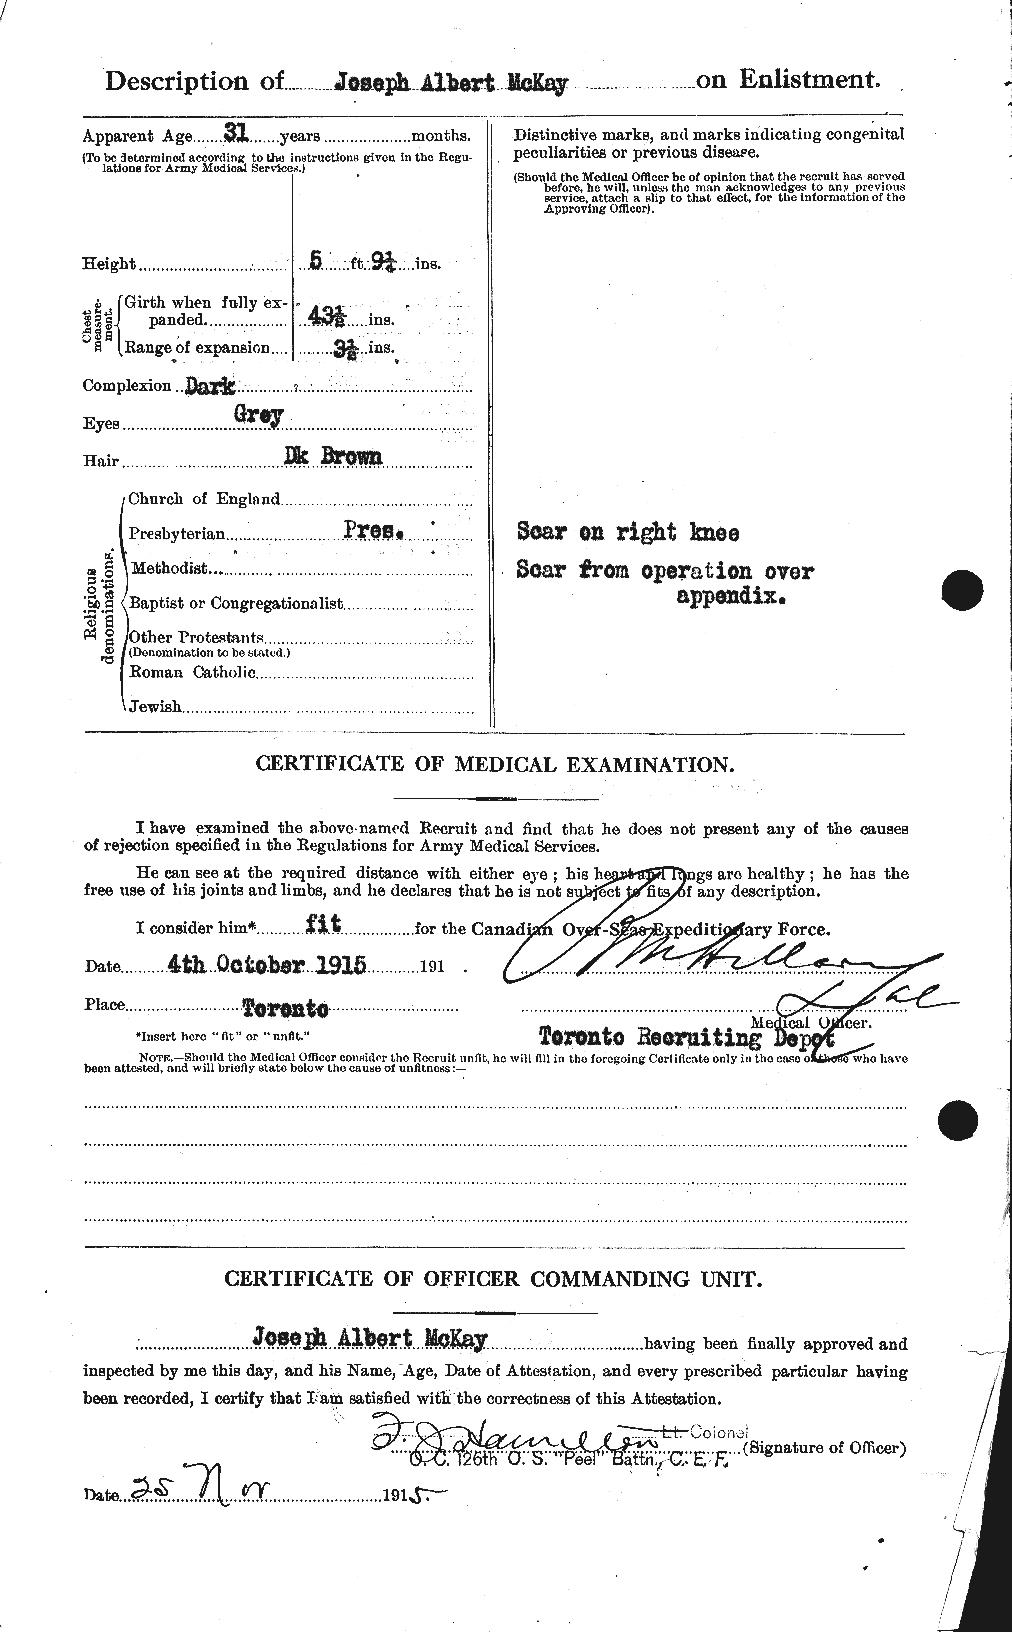 Personnel Records of the First World War - CEF 527111b